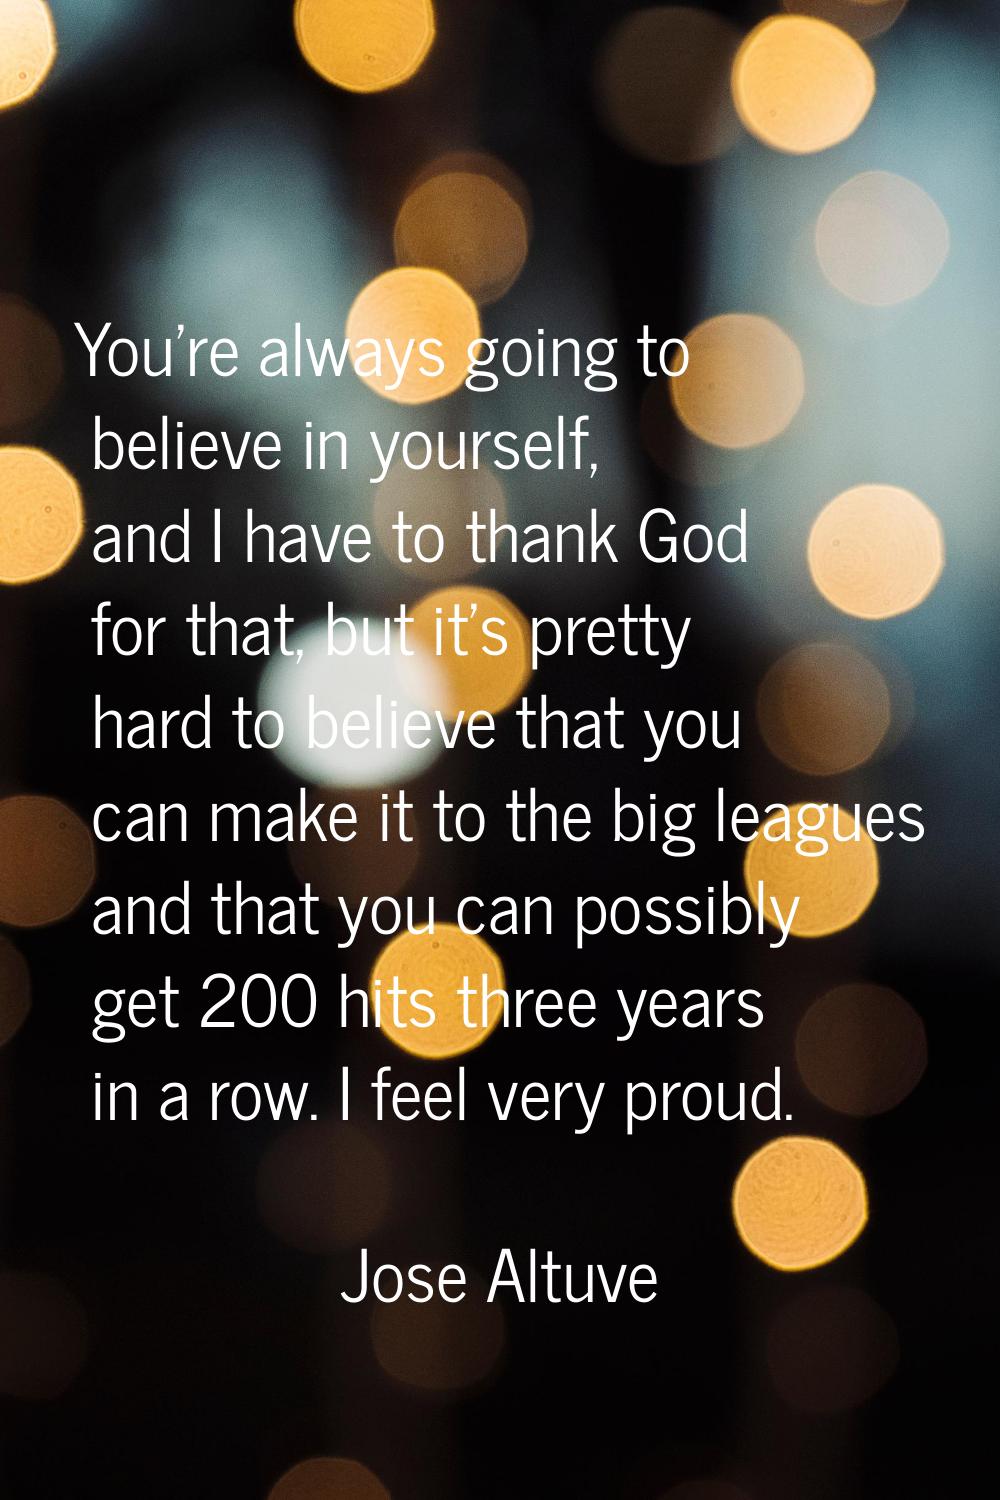 You're always going to believe in yourself, and I have to thank God for that, but it's pretty hard 